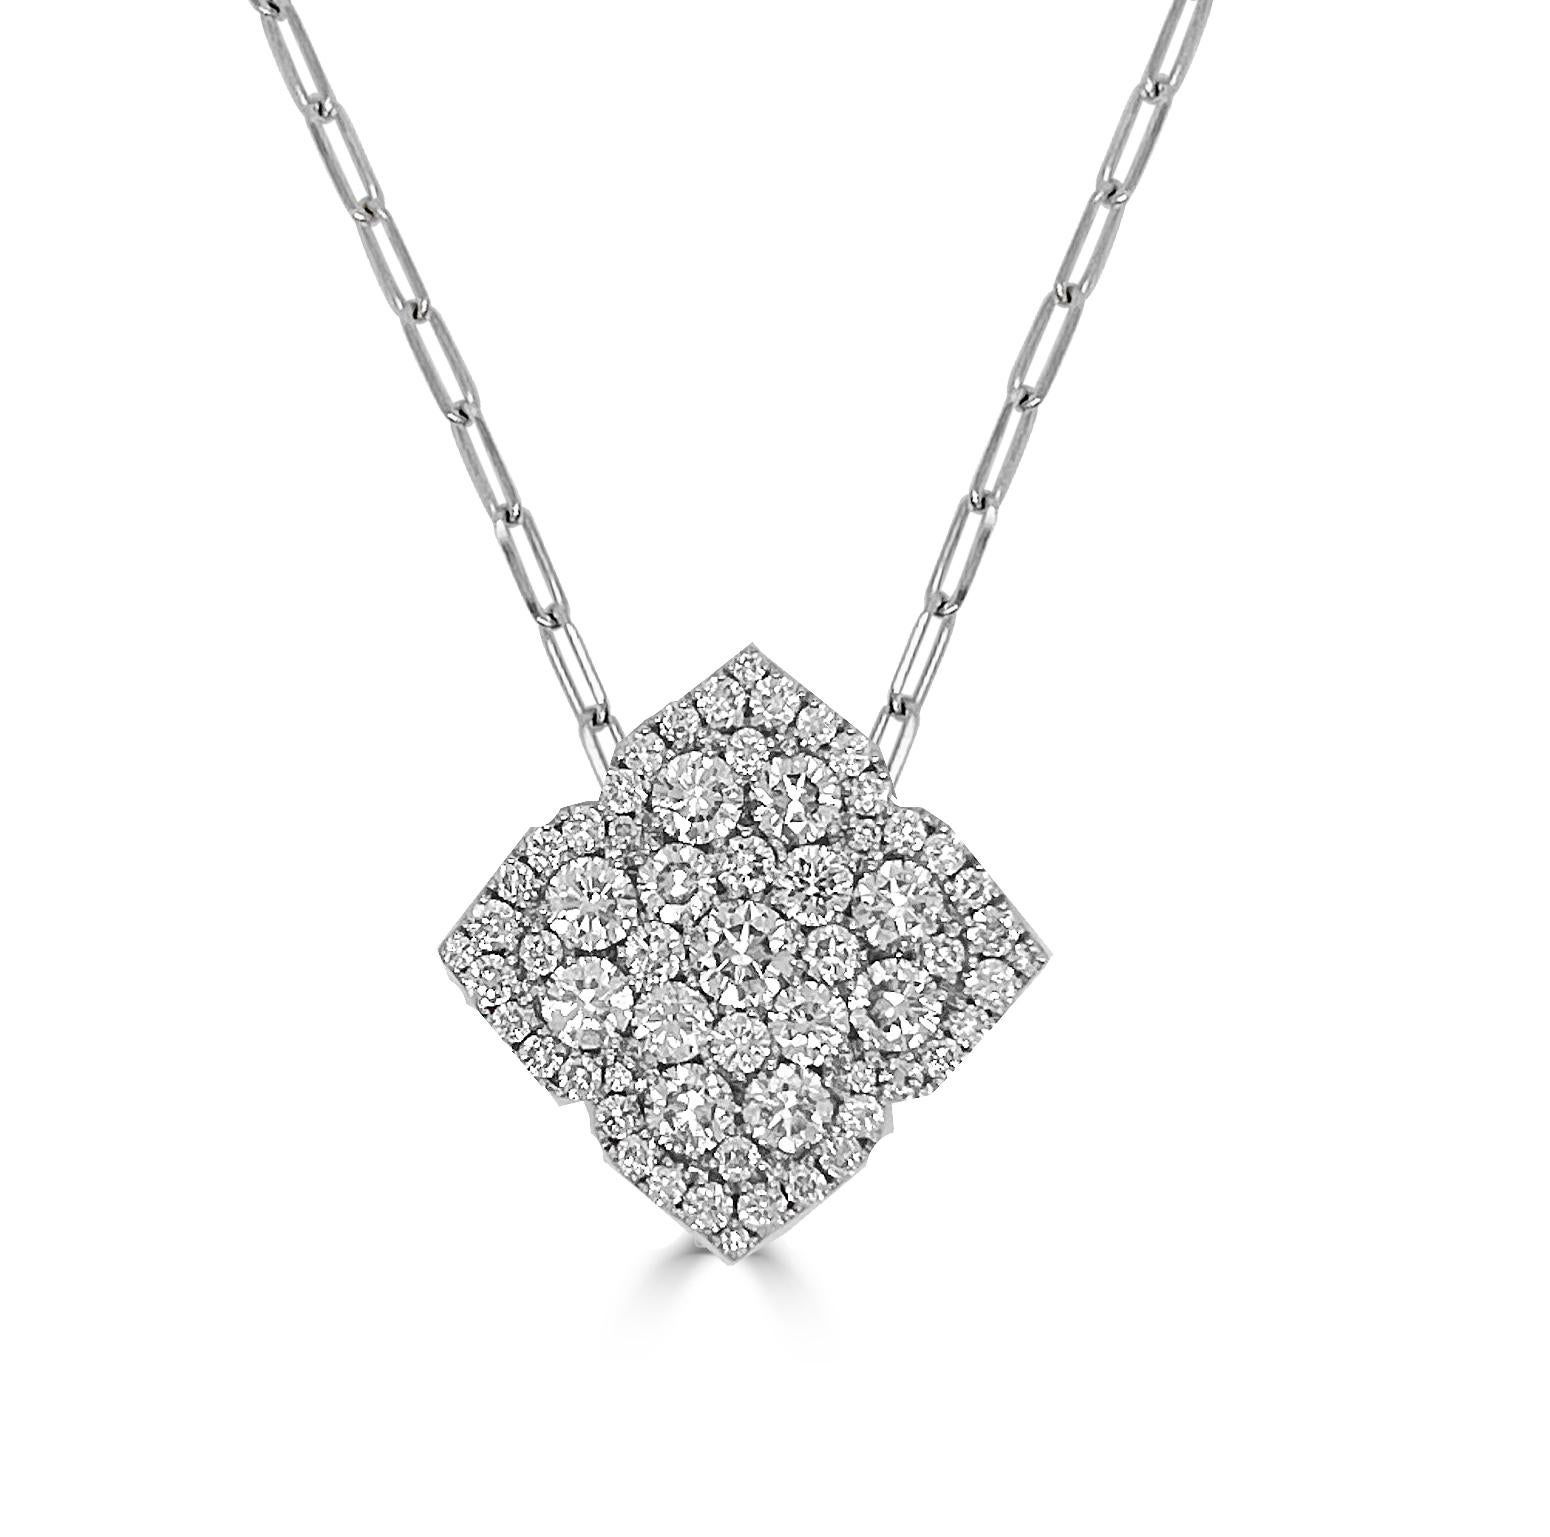 Grande Fleur D’Amour All Diamond Pendant With Hidden Bale And With Chain, 1.88 Ct, (approximately 20 mm)

Available in other metal/ gemstone options: This Diamond pendant can be made in white, pink or yellow gold. 
Matching earrings, bangle and ring